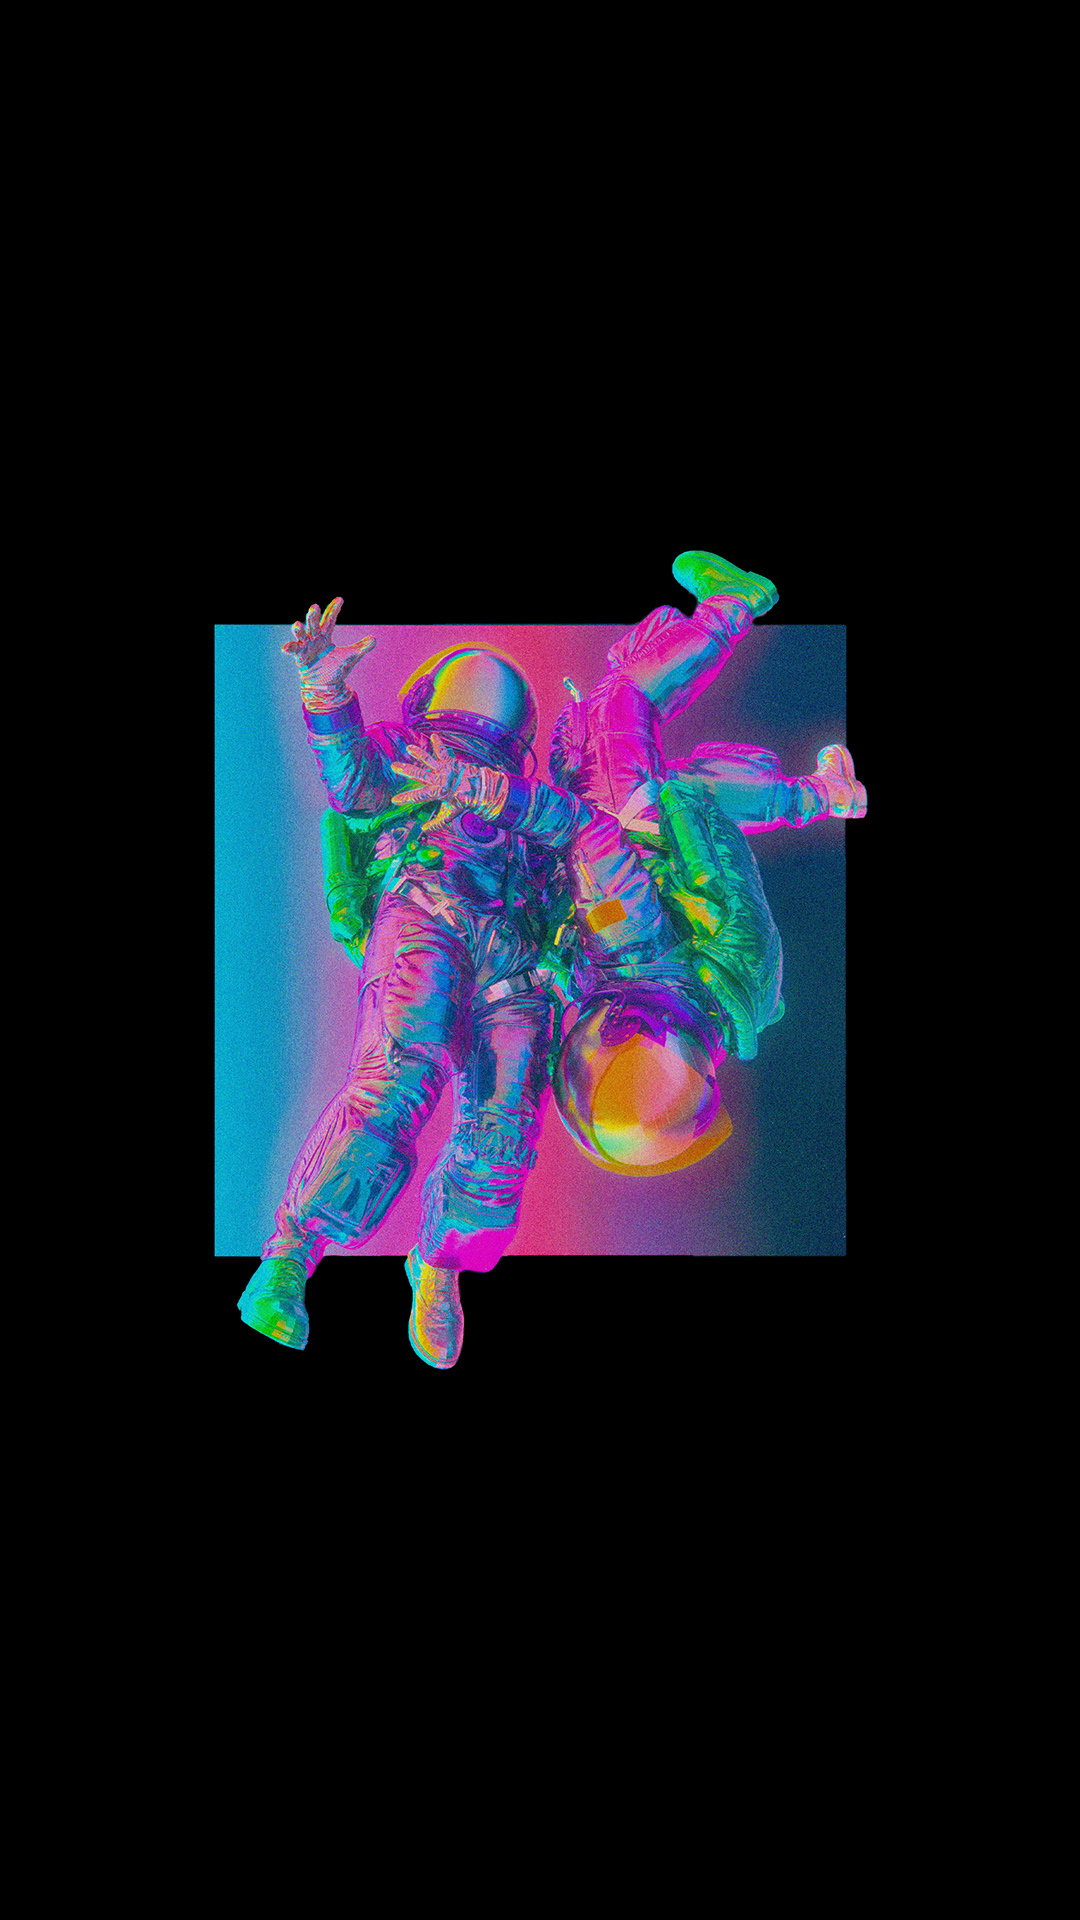 Psychedelic Astronaut Stock Photos Images and Backgrounds for Free Download